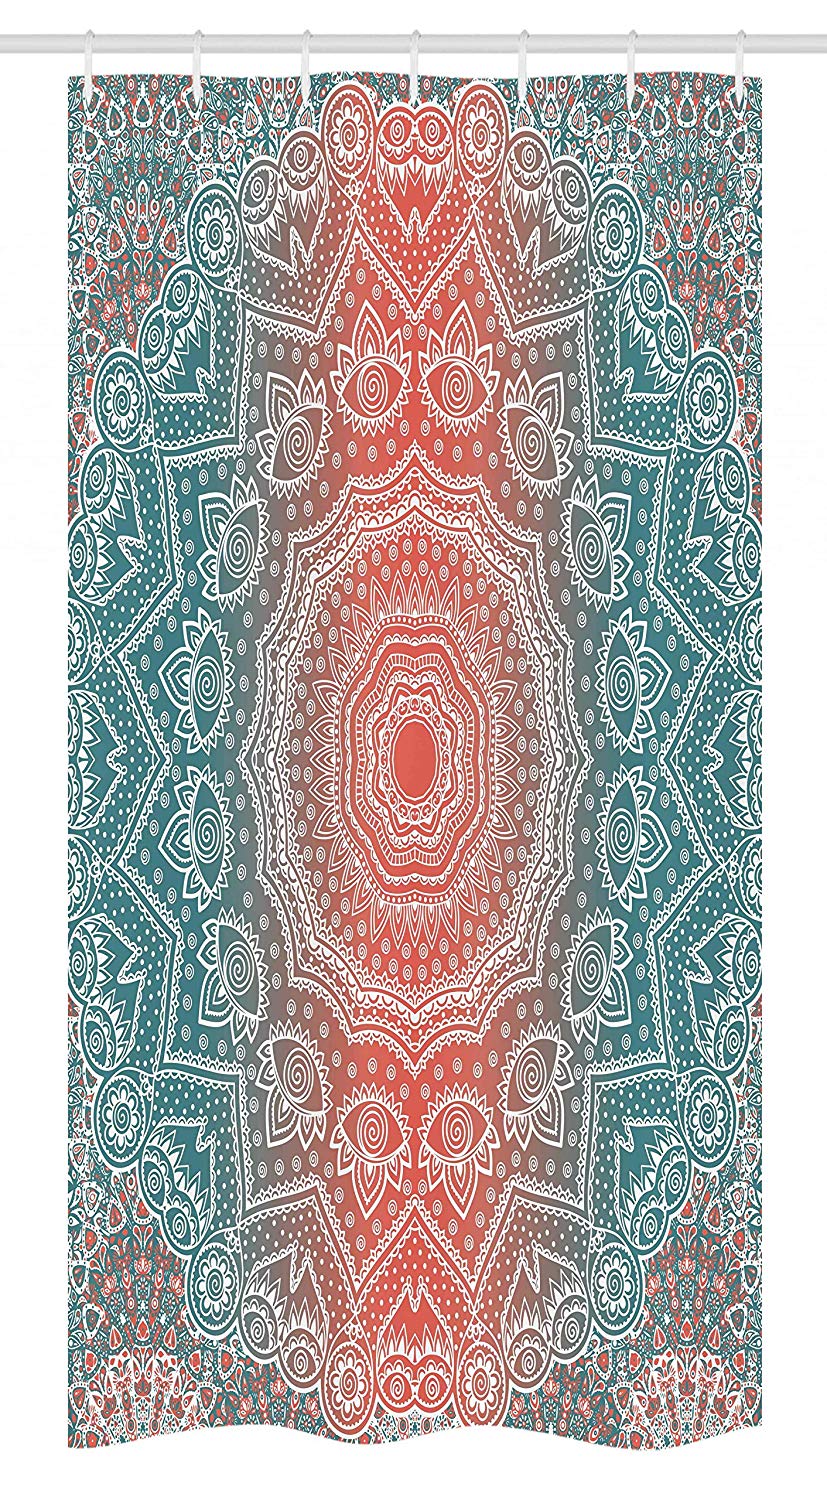 Ambesonne Coral and Teal Stall Shower Curtain, Modern Tribal Mandala Tibetan Healing Motif with Floral Geometric Ombre Art, Fabric Bathroom Decor Set with Hooks, 36